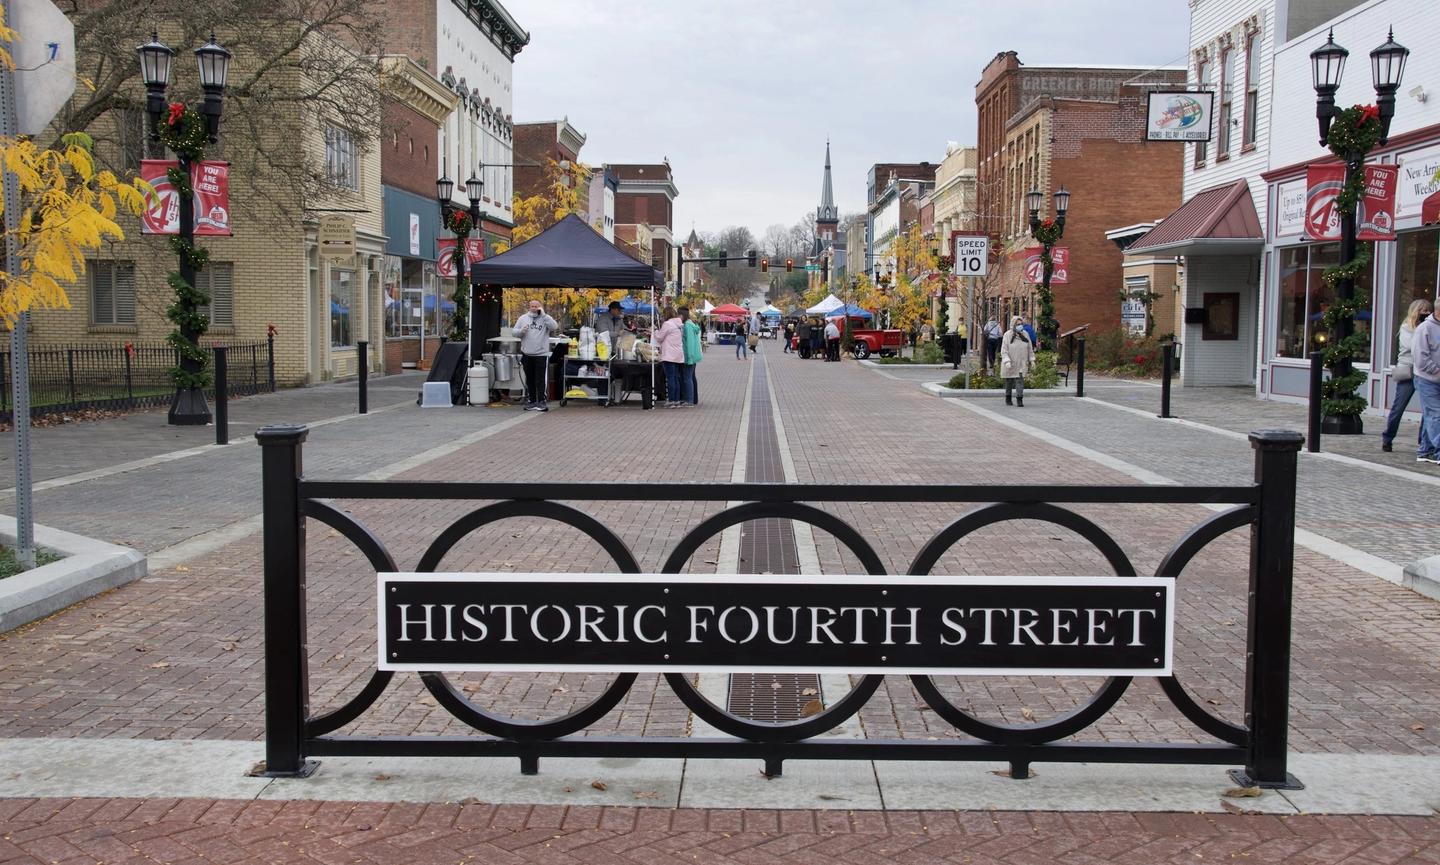 Listed on the National Register of Historic Places, Historic Fourth Street is home to antique stores, specialty shops, restaurants, and special events. 